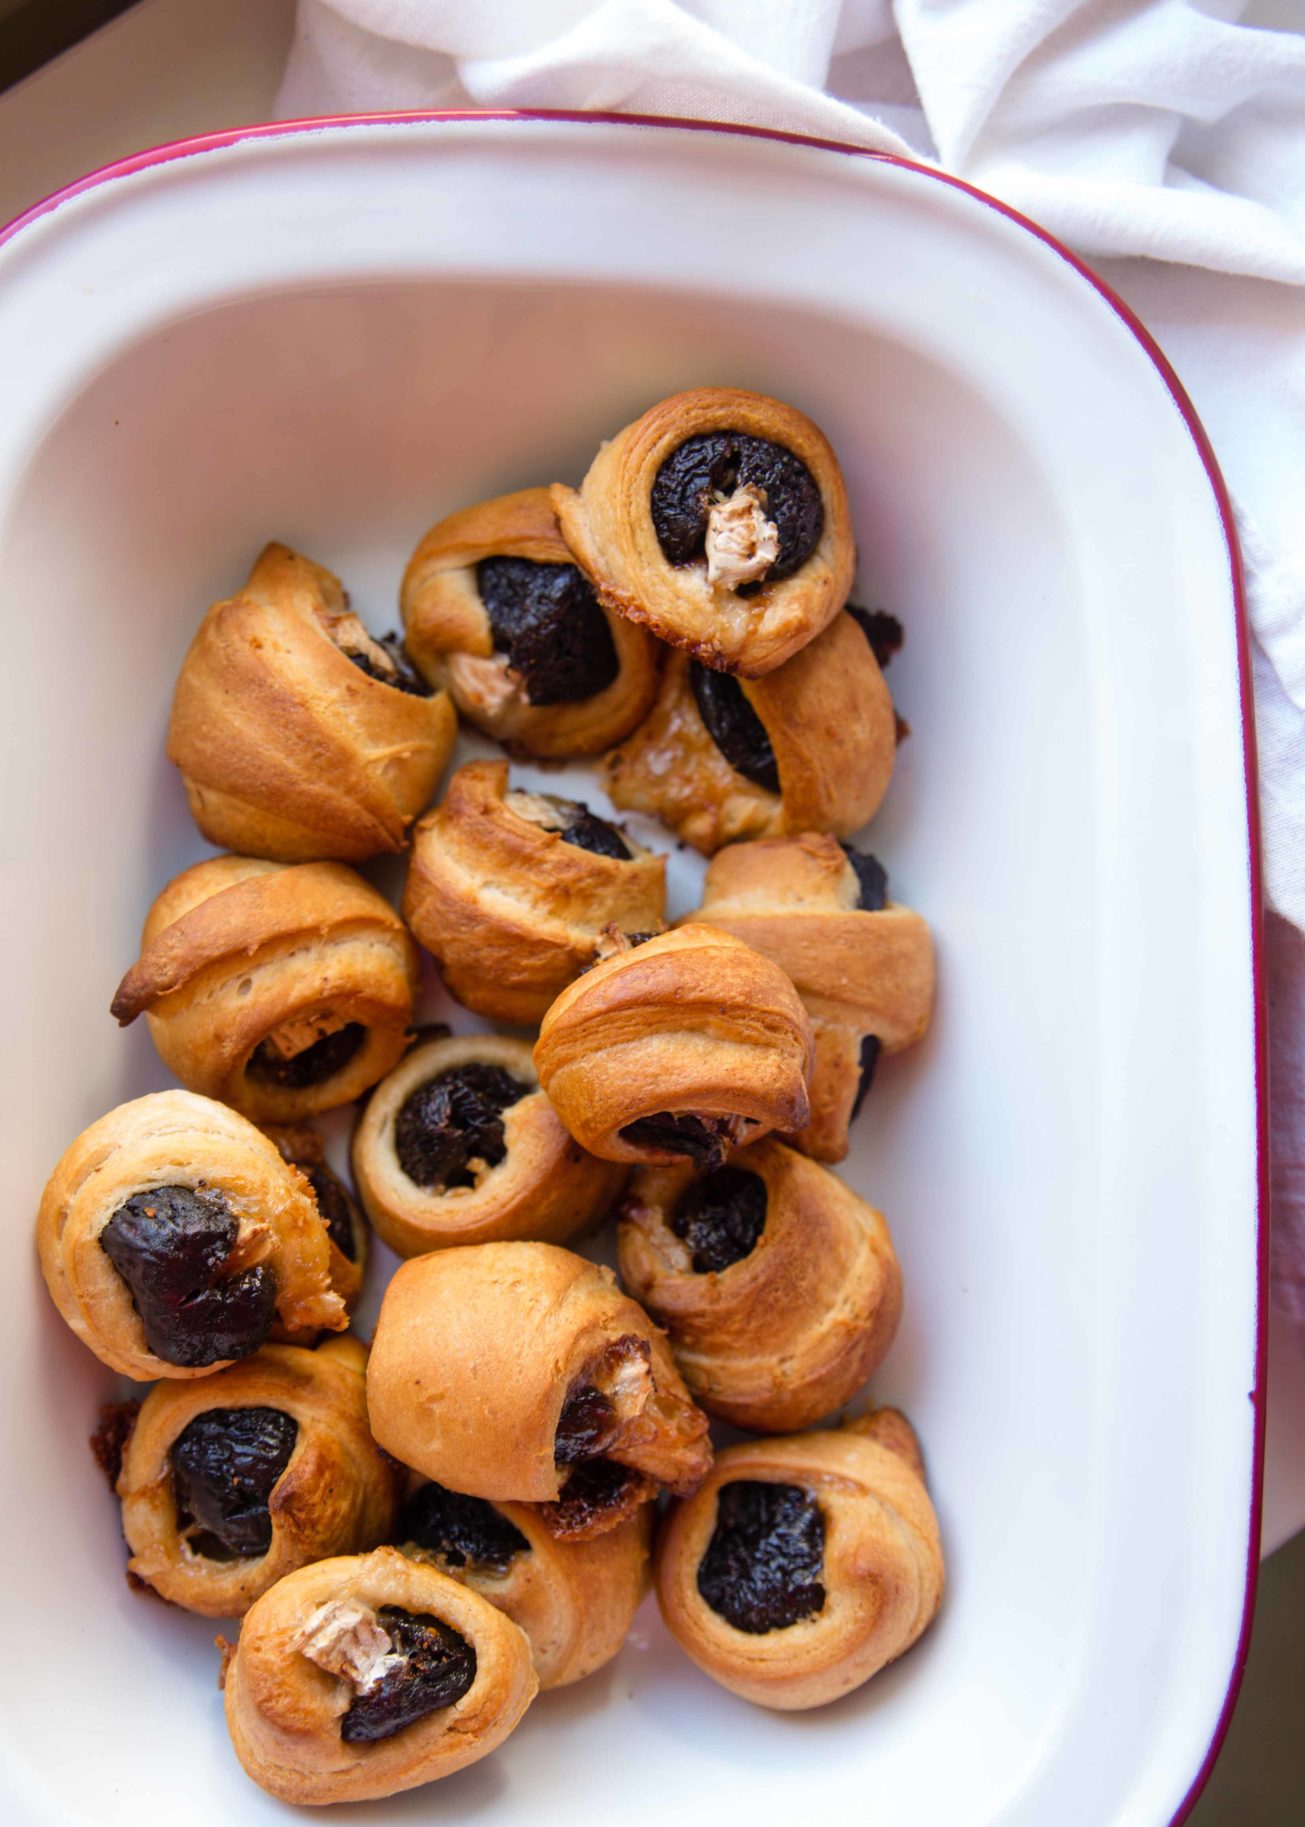 Pigs in a blanket, but better—figs in a blanket baked brie crescent rolls will make you melt. Snack on fig + brie baked in crescent rolls.